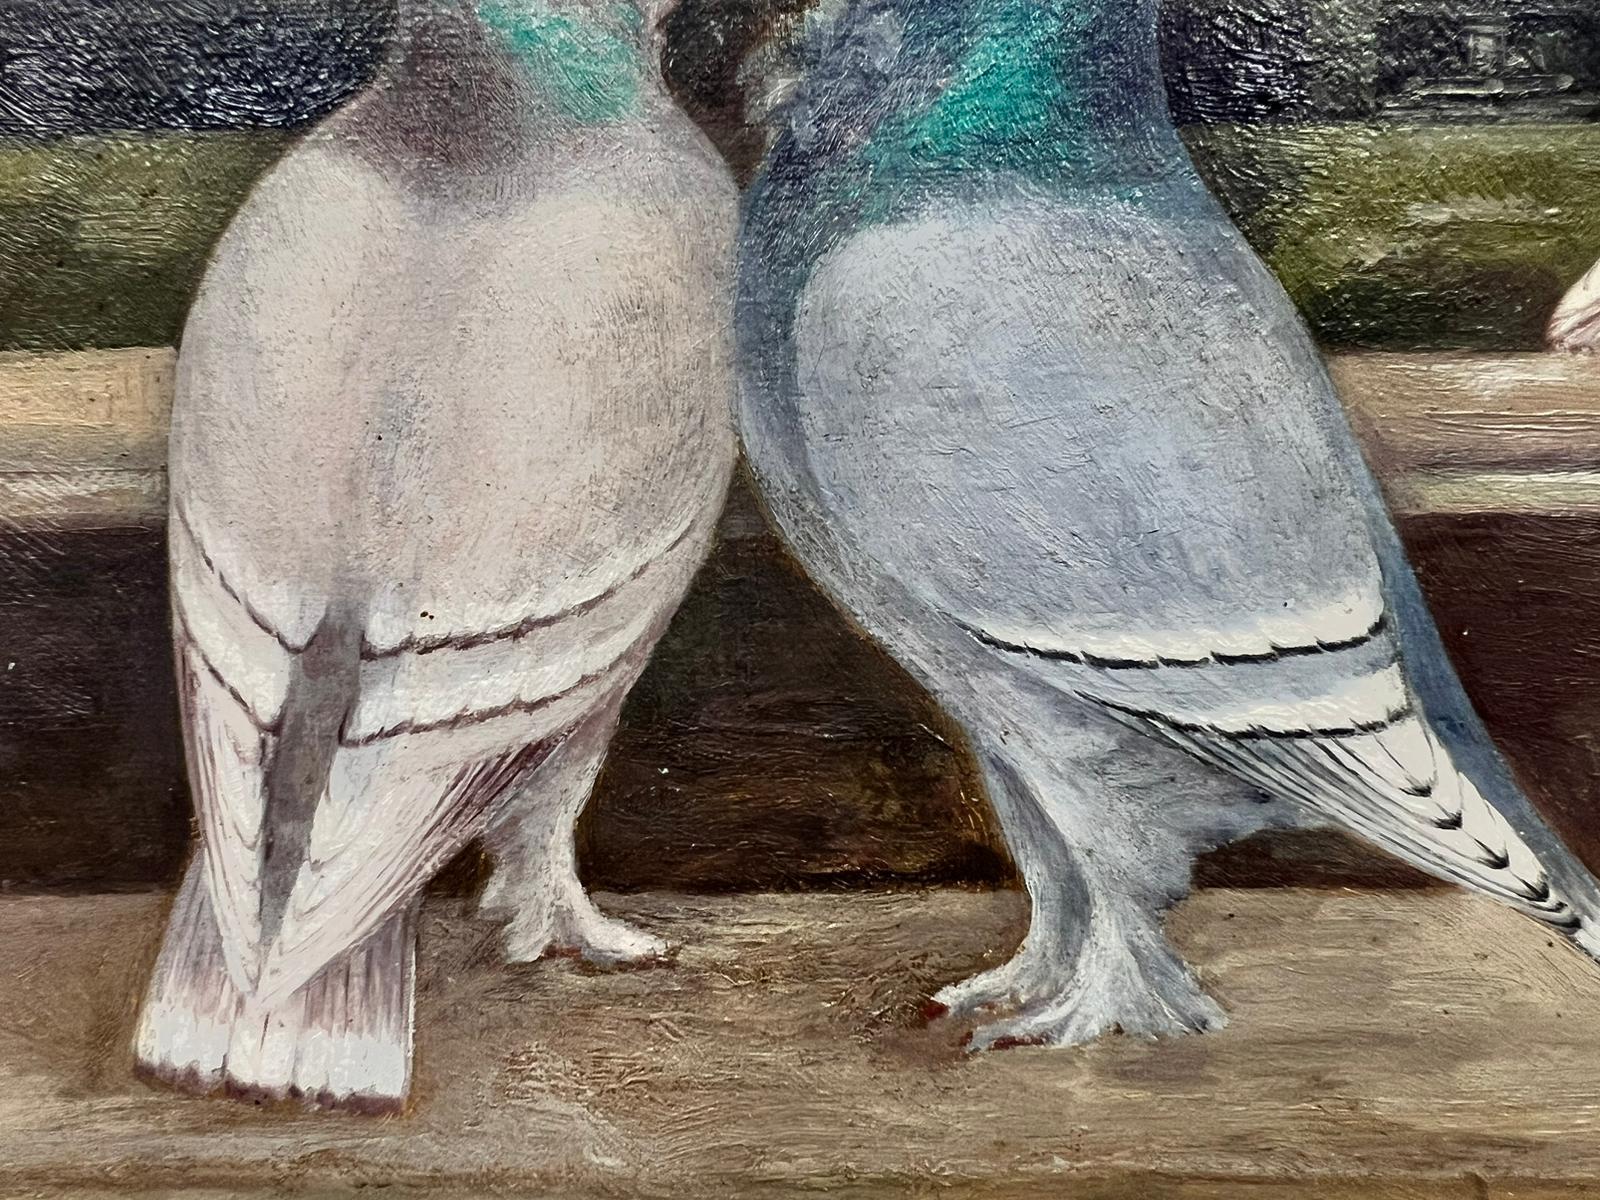 Artist/ School: English School, early 1900's

Title: Doves or Pigeons in an ornamental park landscape setting. 

Medium: oil on canvas, framed

Size : 10.5 x 15 inches
Framed: 8 x 12 inches

Colors: Grey colors with blue, green and turquoise